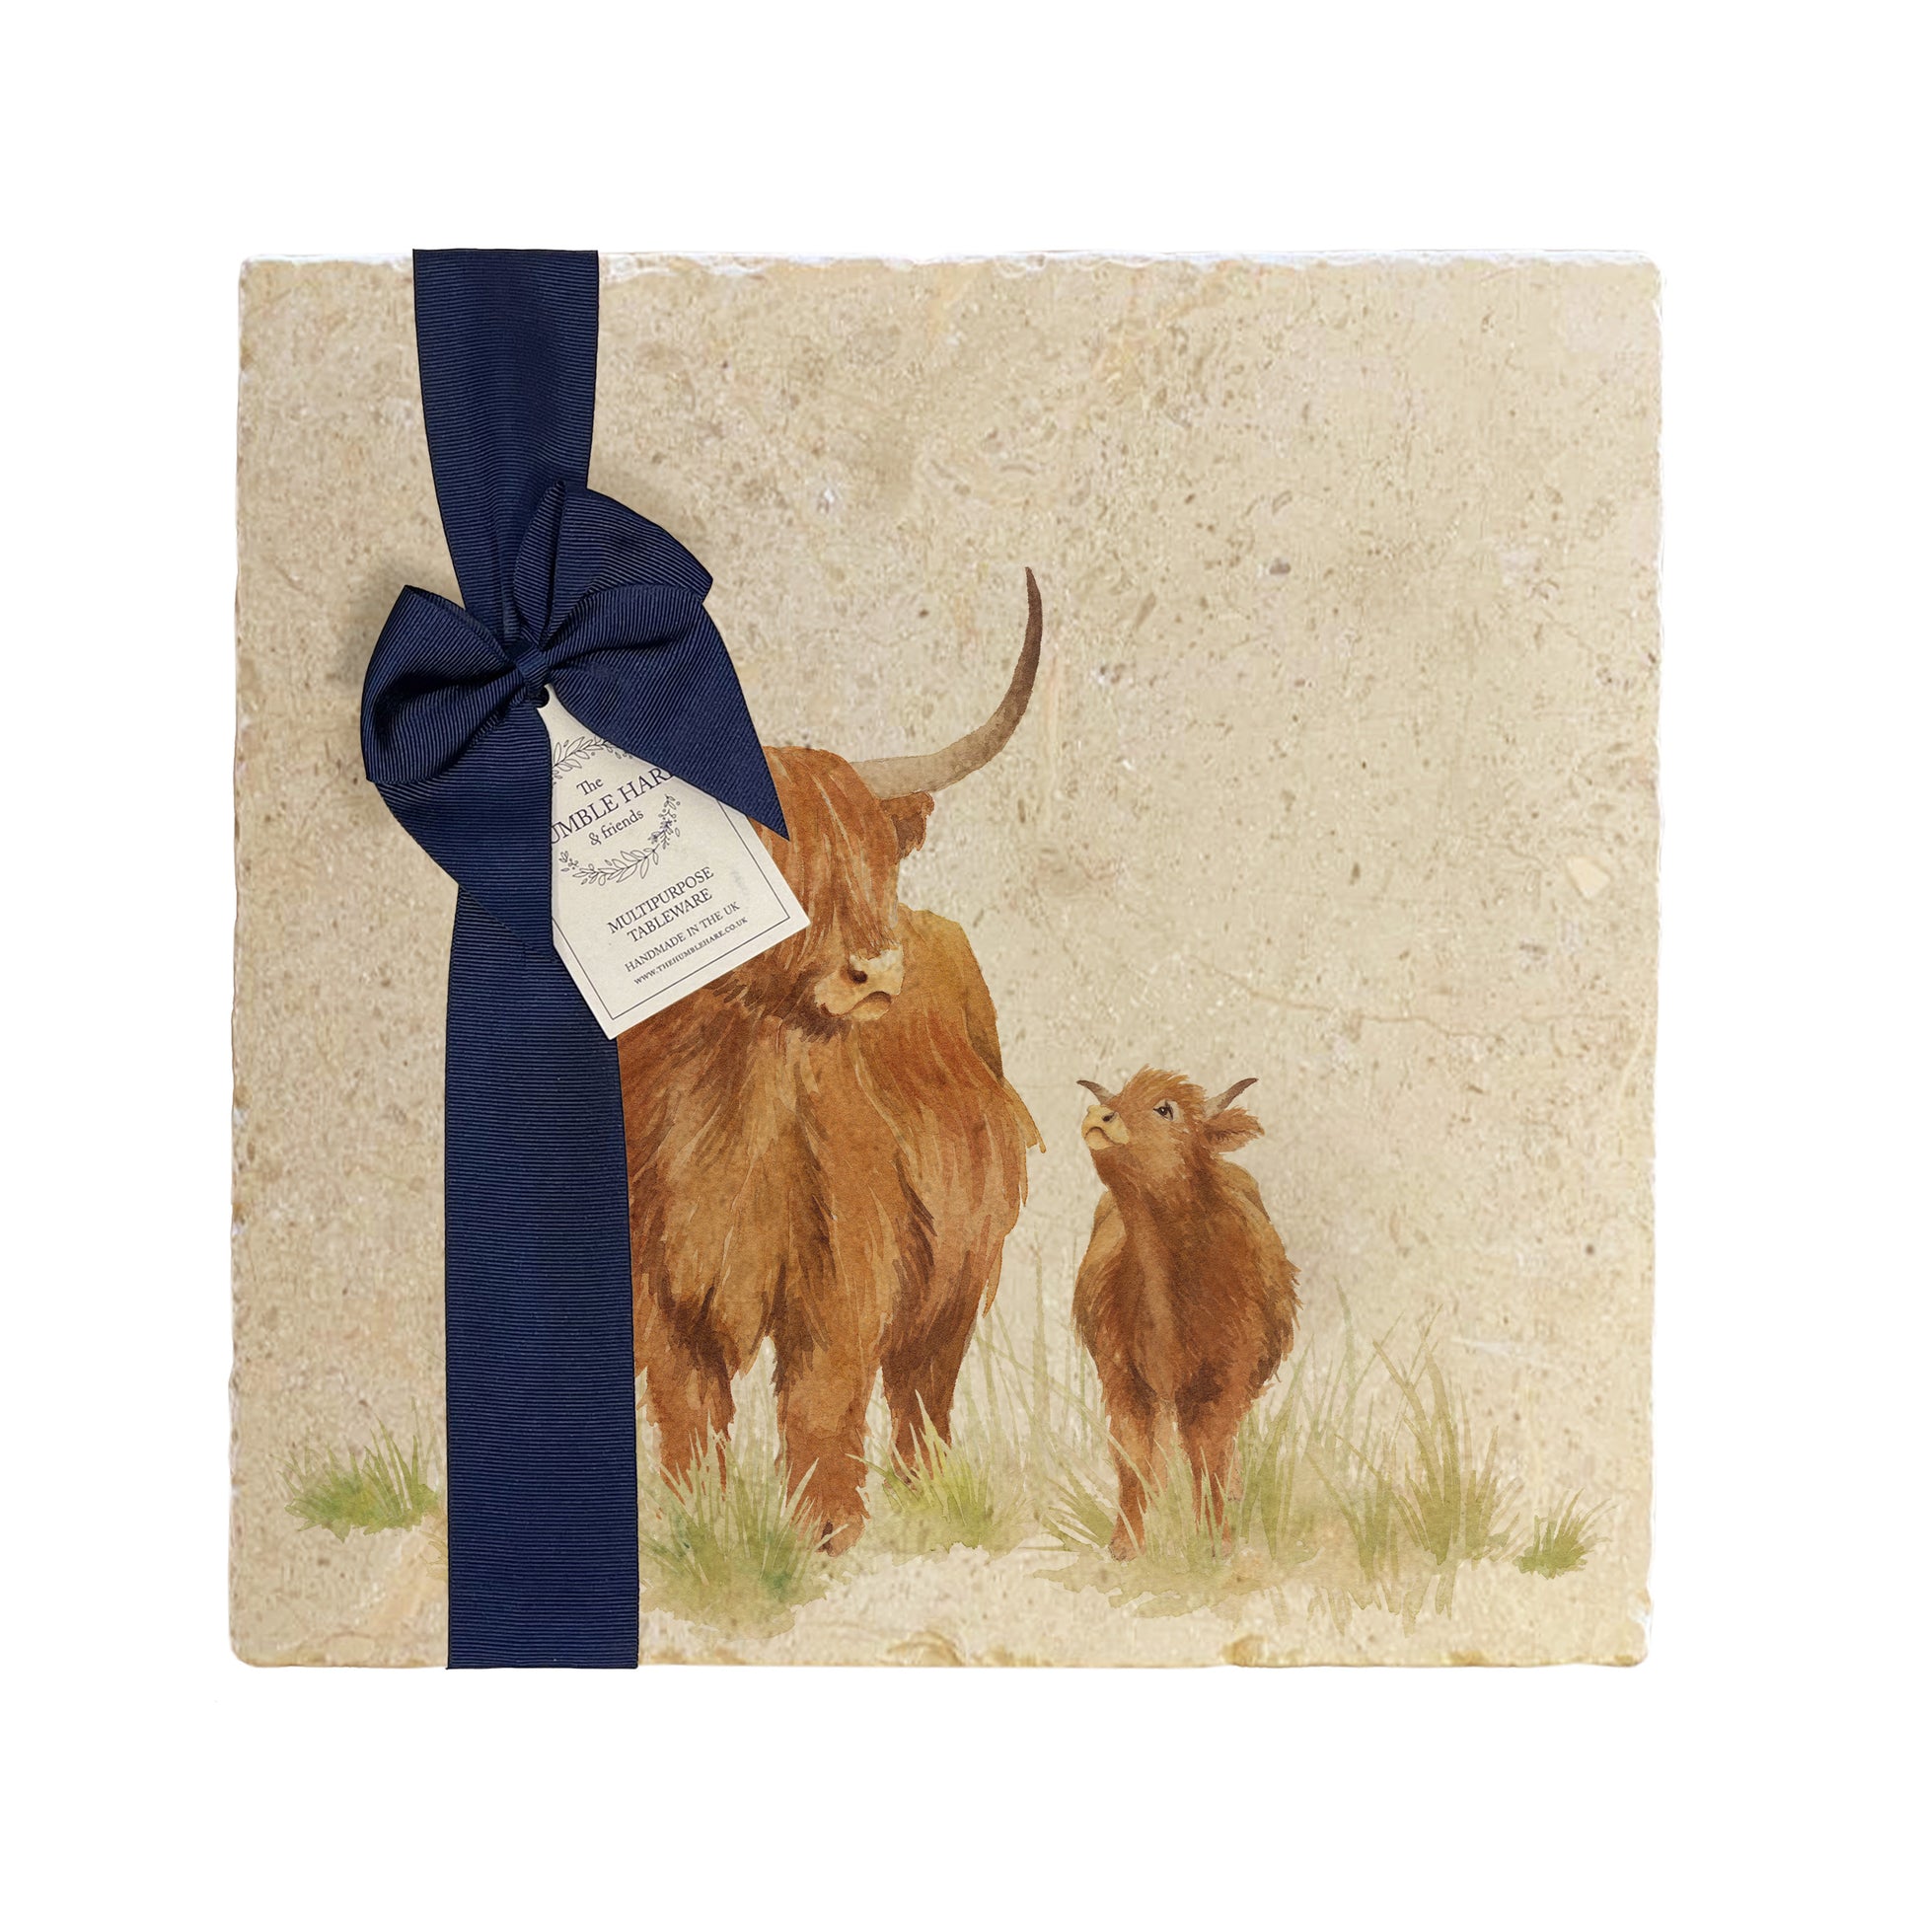 A multipurpose marble platter with a highland cow and calf design, packaged with a luxurious dark blue bow and branded gift tag.